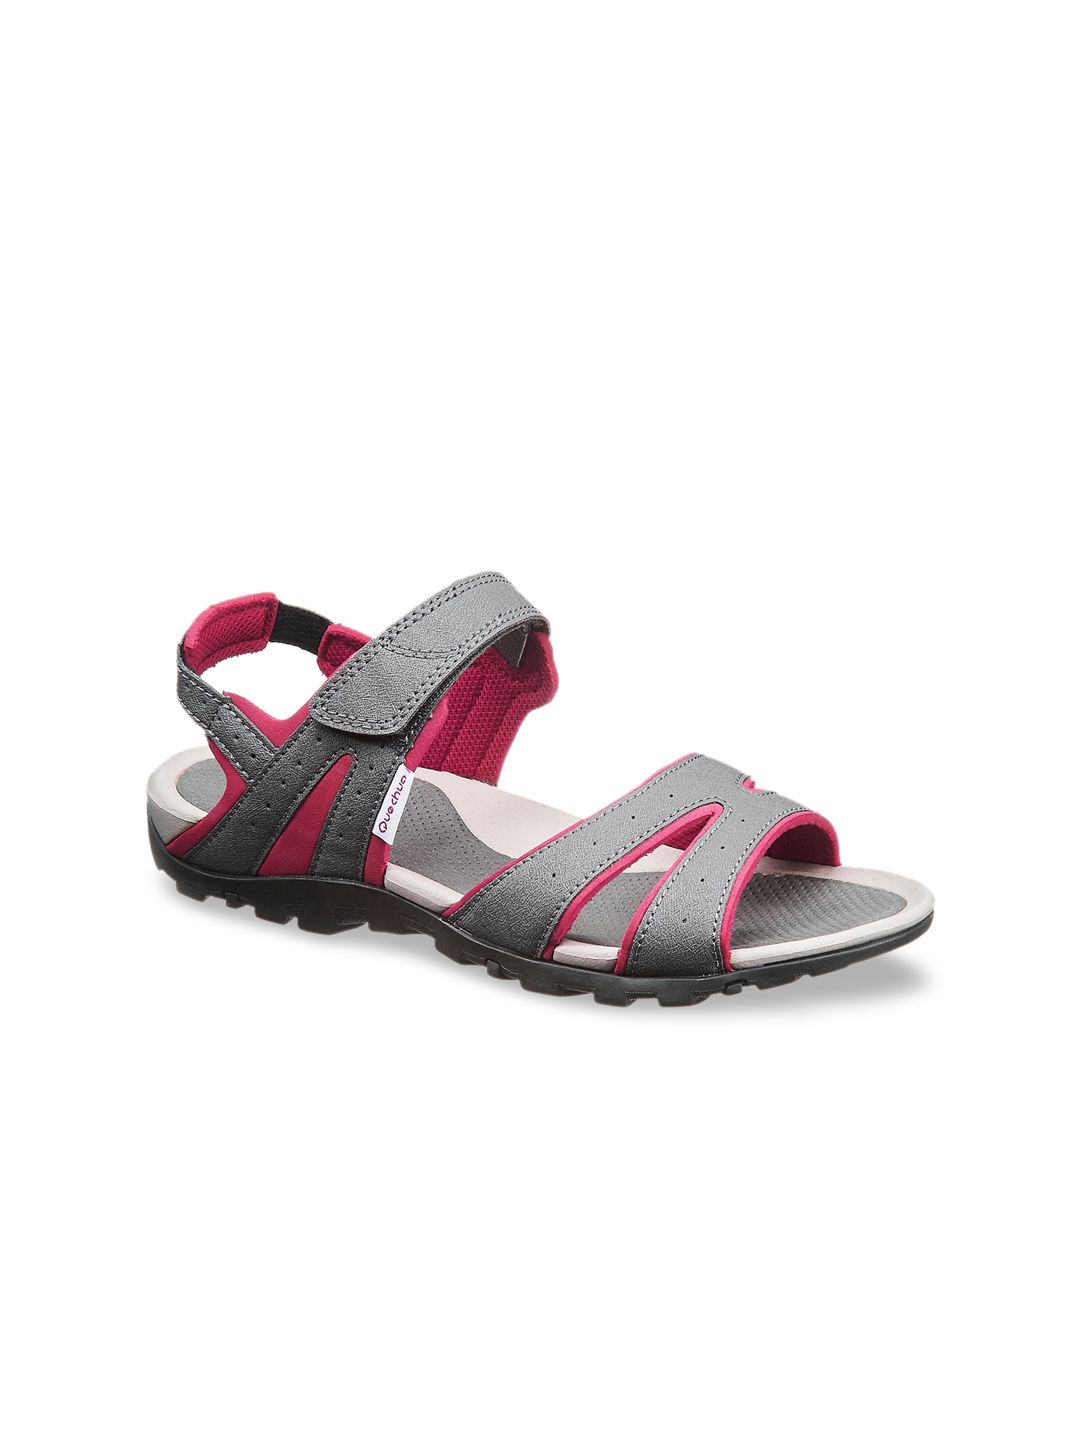 Quechua By Decathlon Women Grey & Red Sports Sandals Price in India